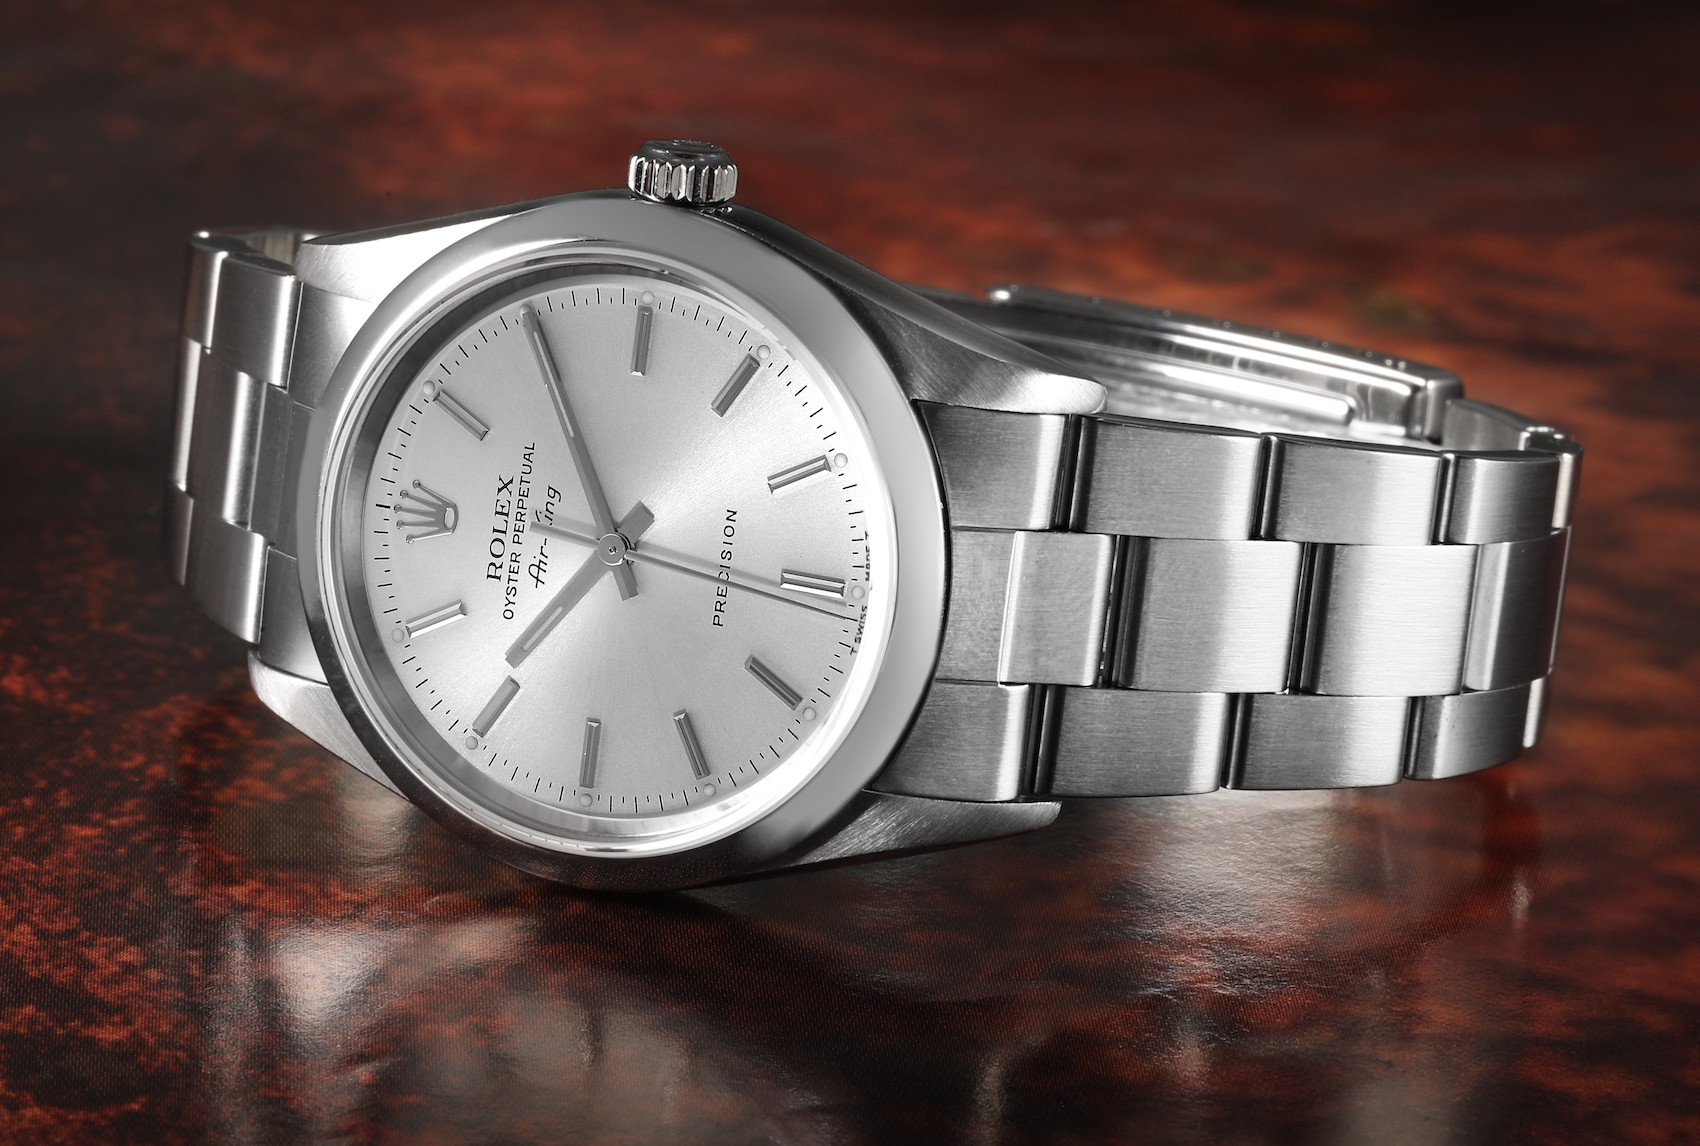 5 Best Affordable Rolex Watches - Rolex Air-King 14000